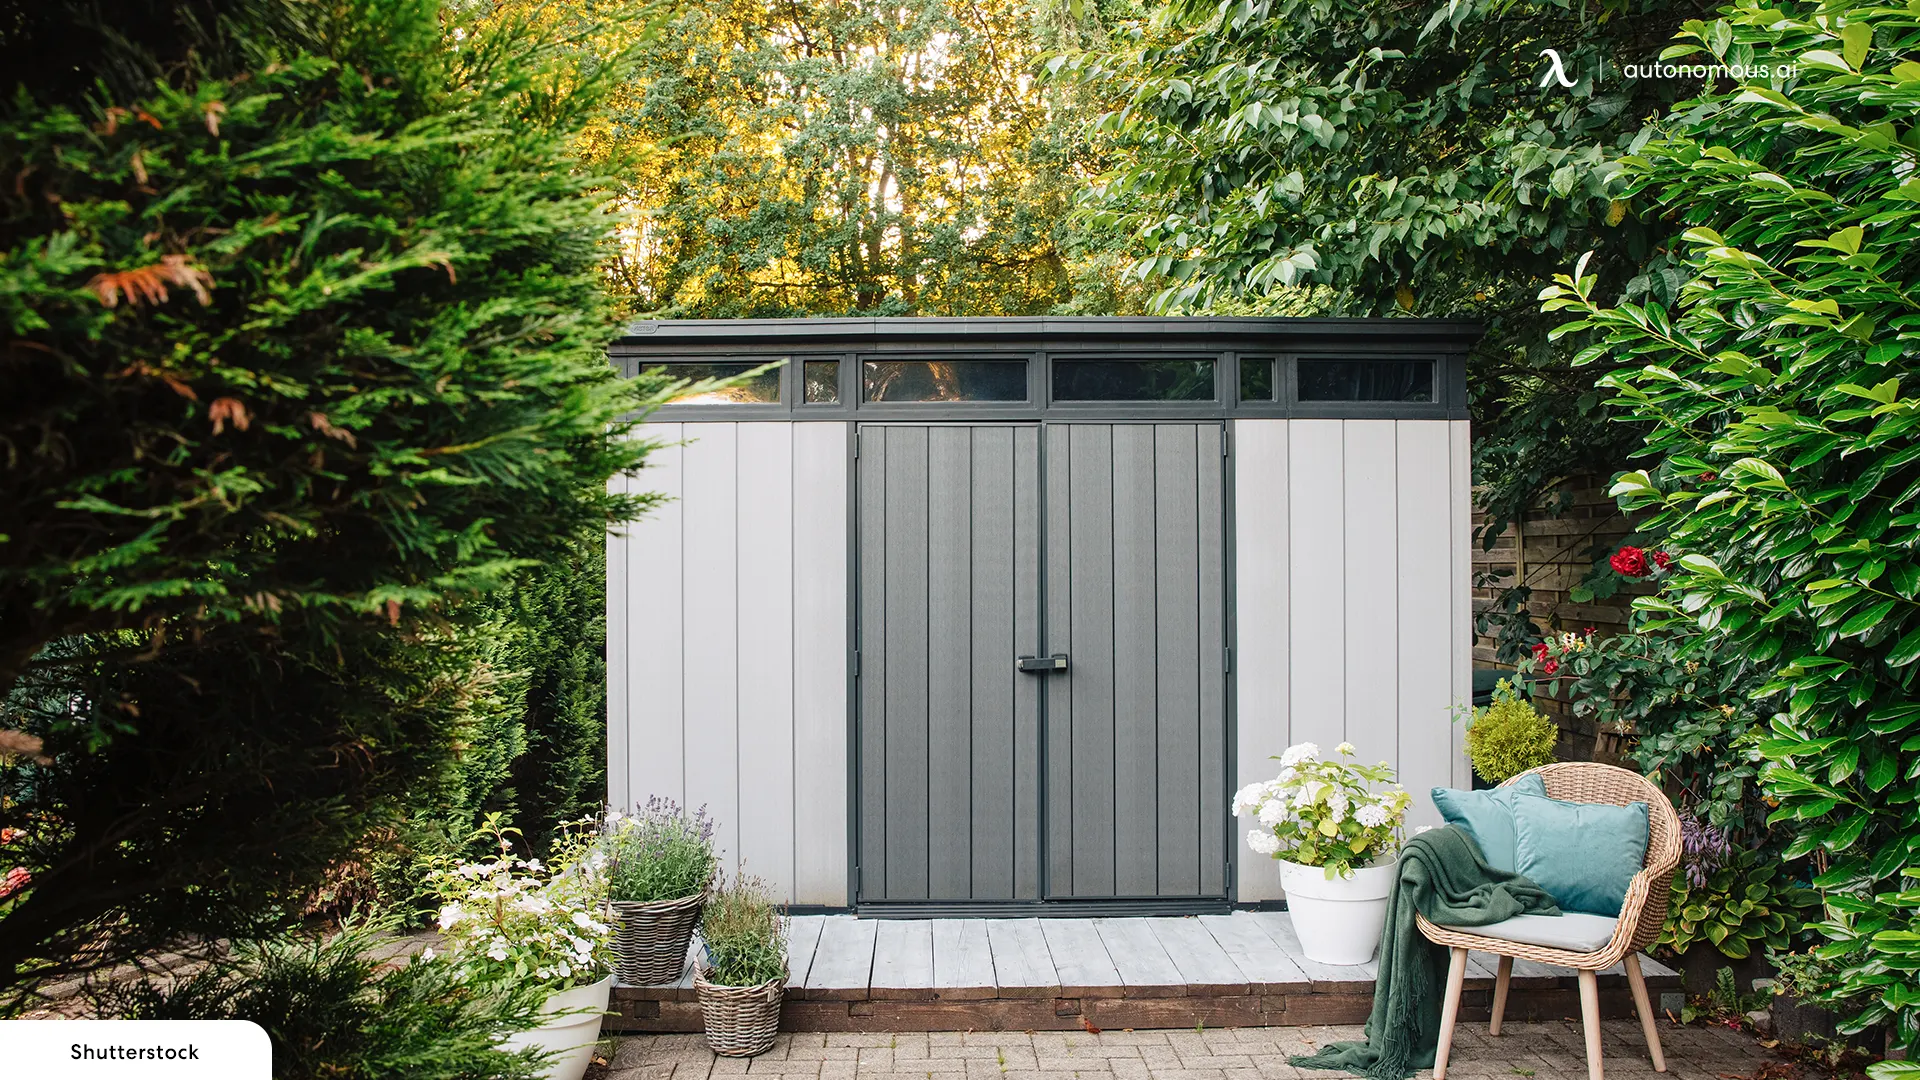 What Are the Better Ways to Protect the Shed's Base?